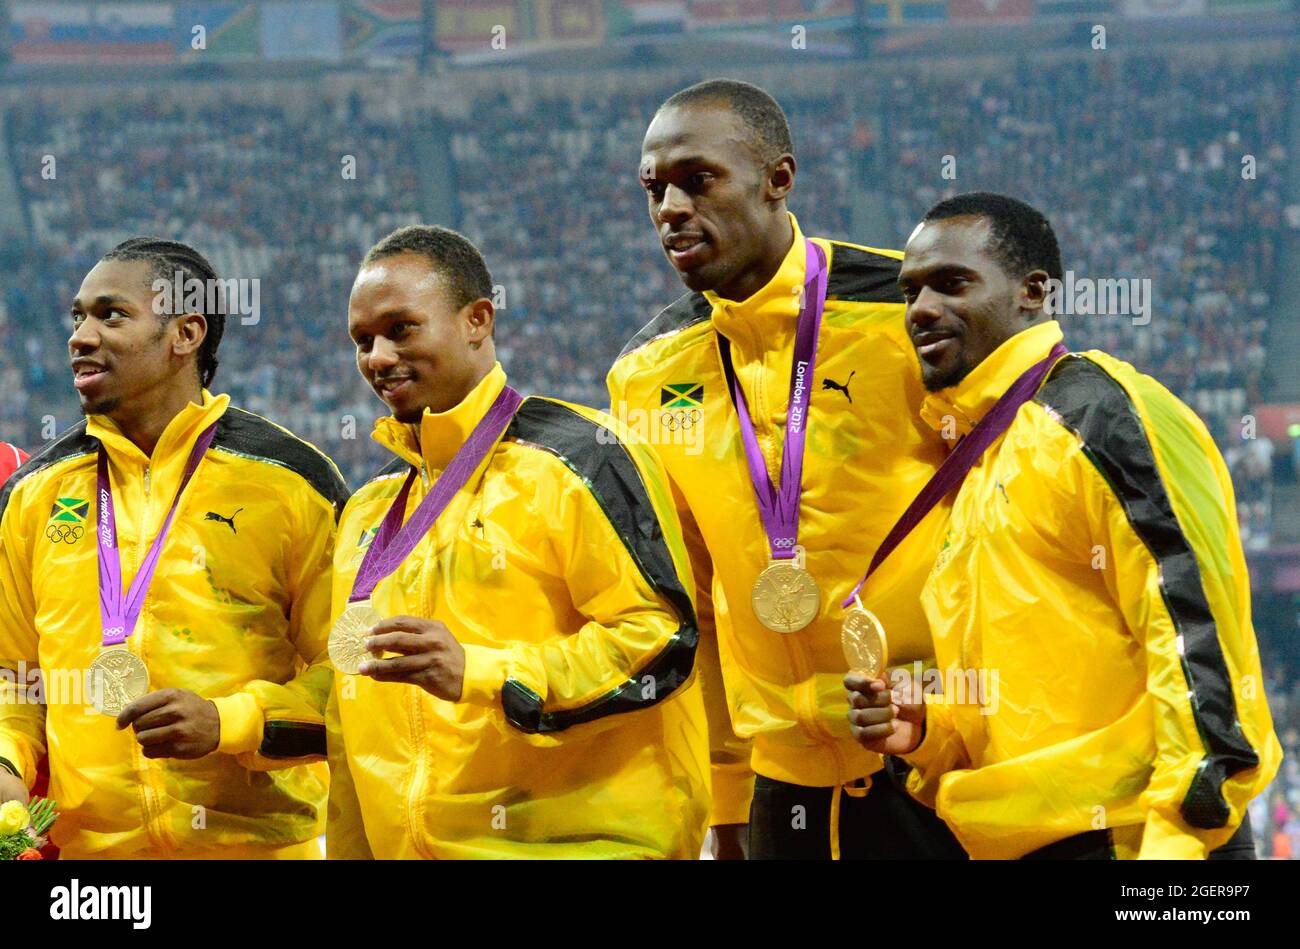 Jamaica wins gold in the 4 x 100m men's final on the final night of Athletics at Olympic Stadium, London 11 August 2012 Stock Photo